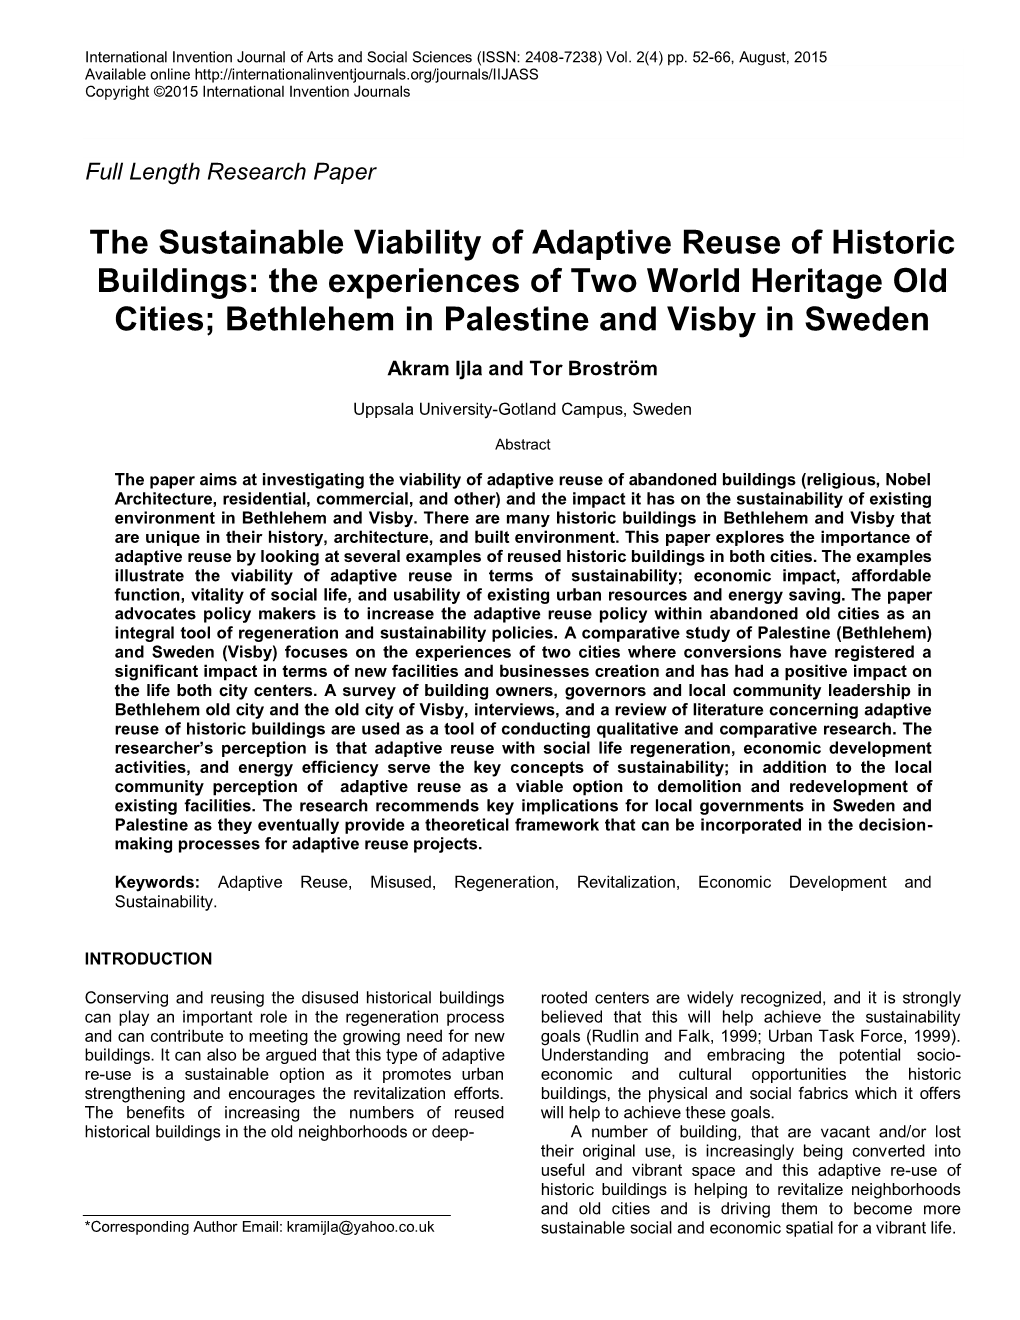 The Sustainable Viability of Adaptive Reuse of Historic Buildings: the Experiences of Two World Heritage Old Cities; Bethlehem in Palestine and Visby in Sweden